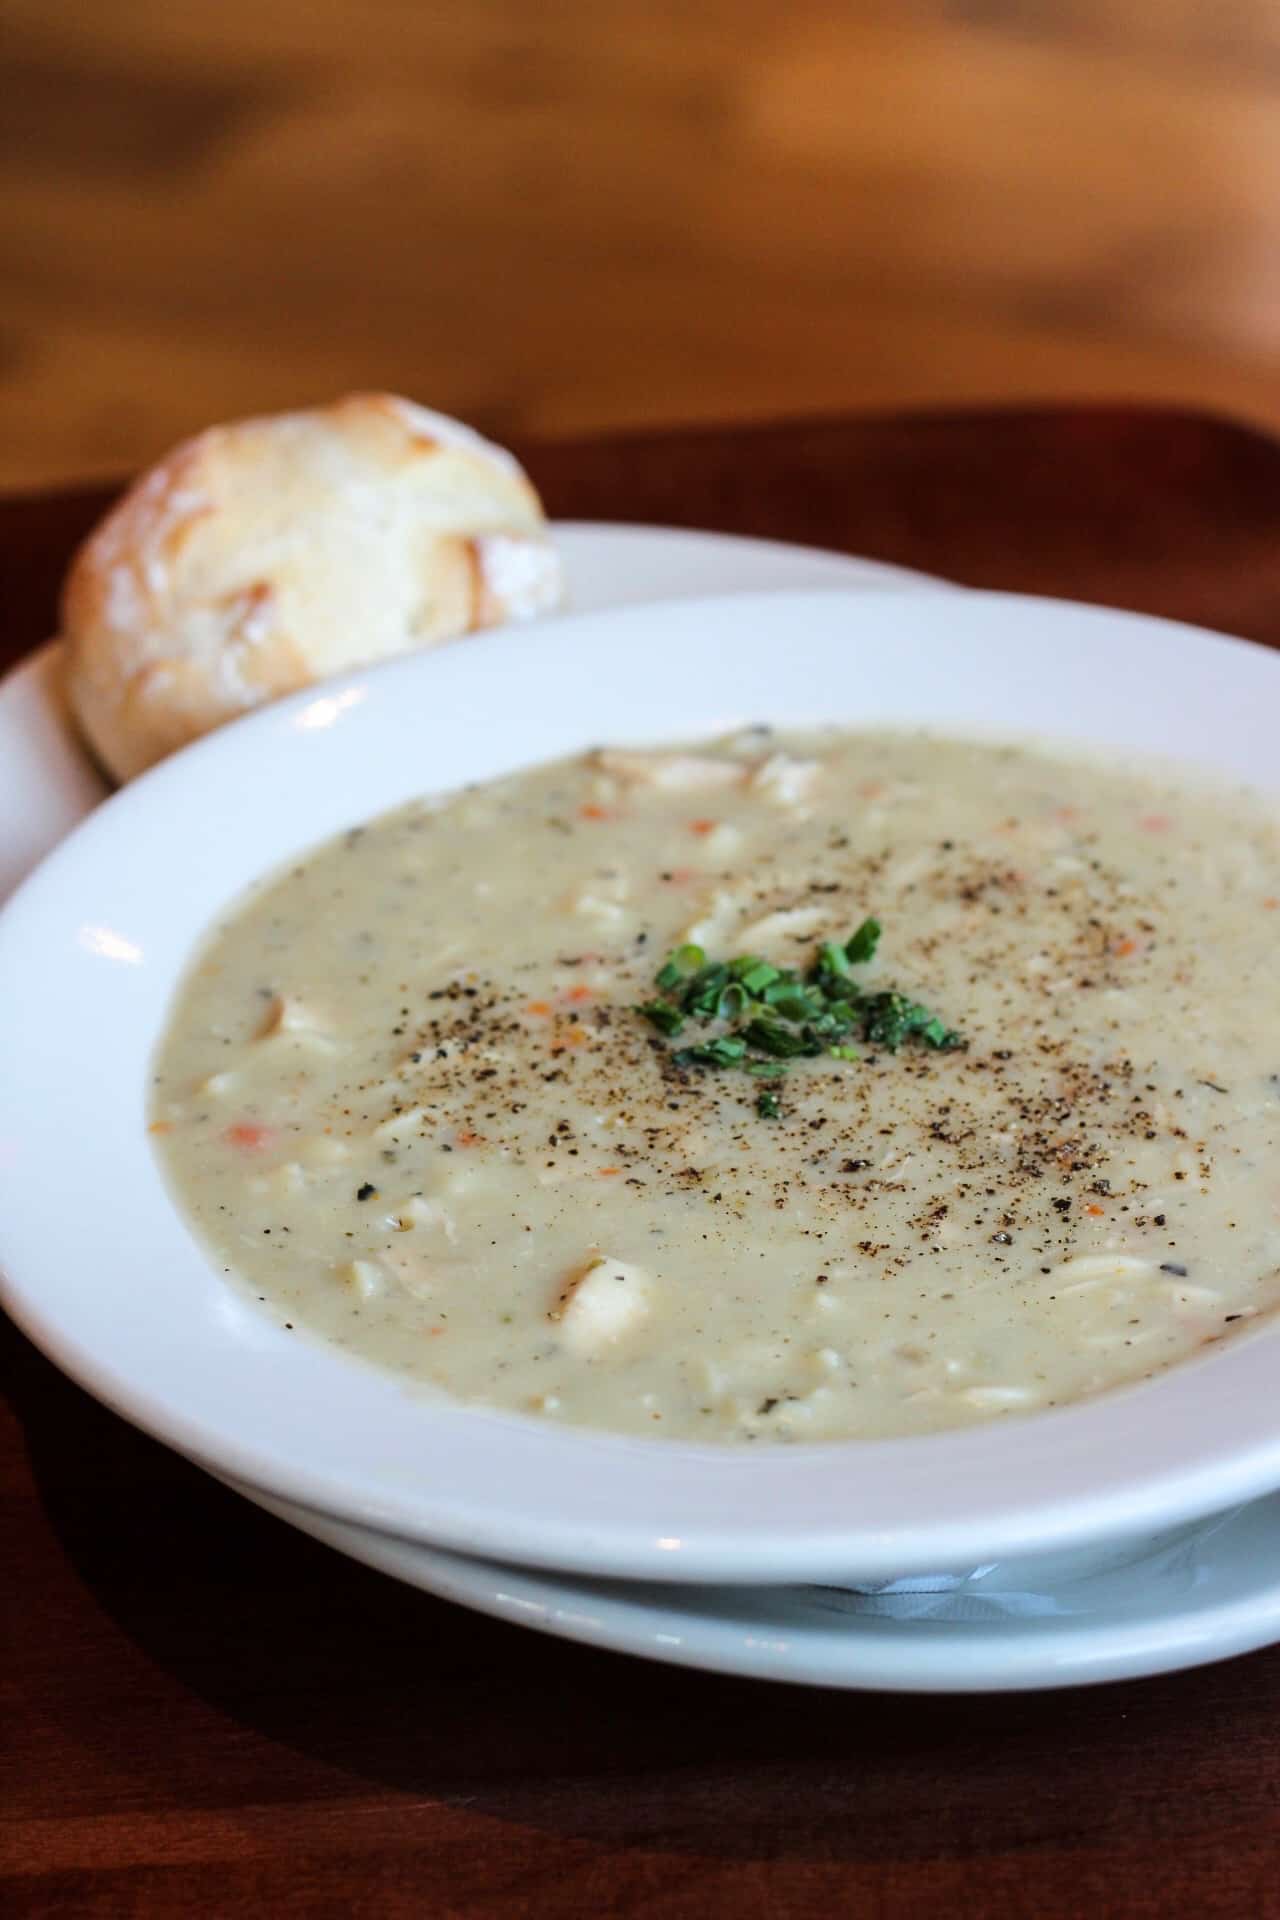 A collection of restaurants that serve the best soup in Salt Lake City, Utah! From clam chowder to chicken noodle to french onion, we have you covered.